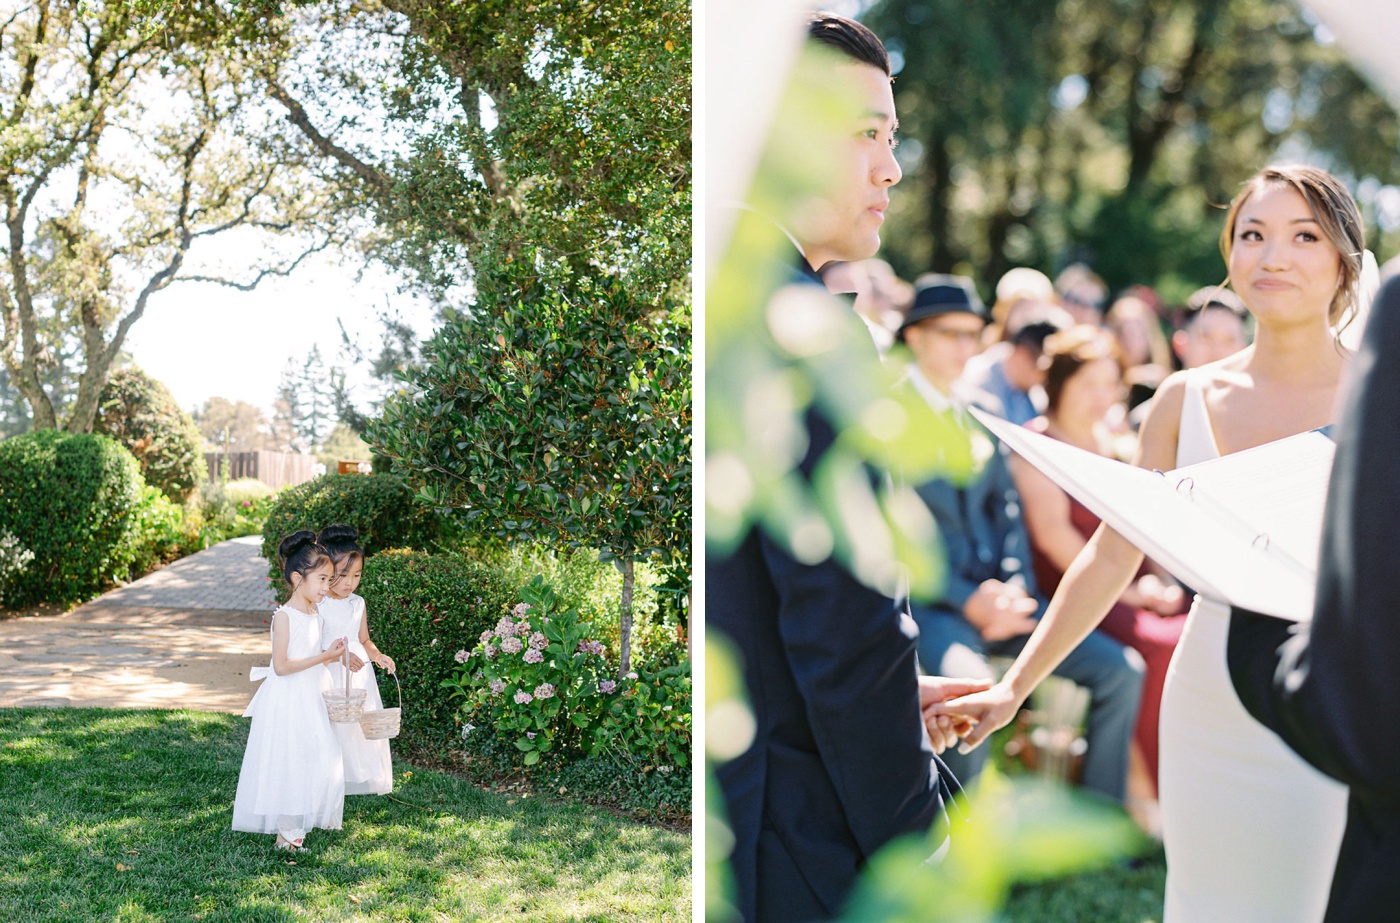 Outdoor wedding ceremony at Thomas Fogarty Winery